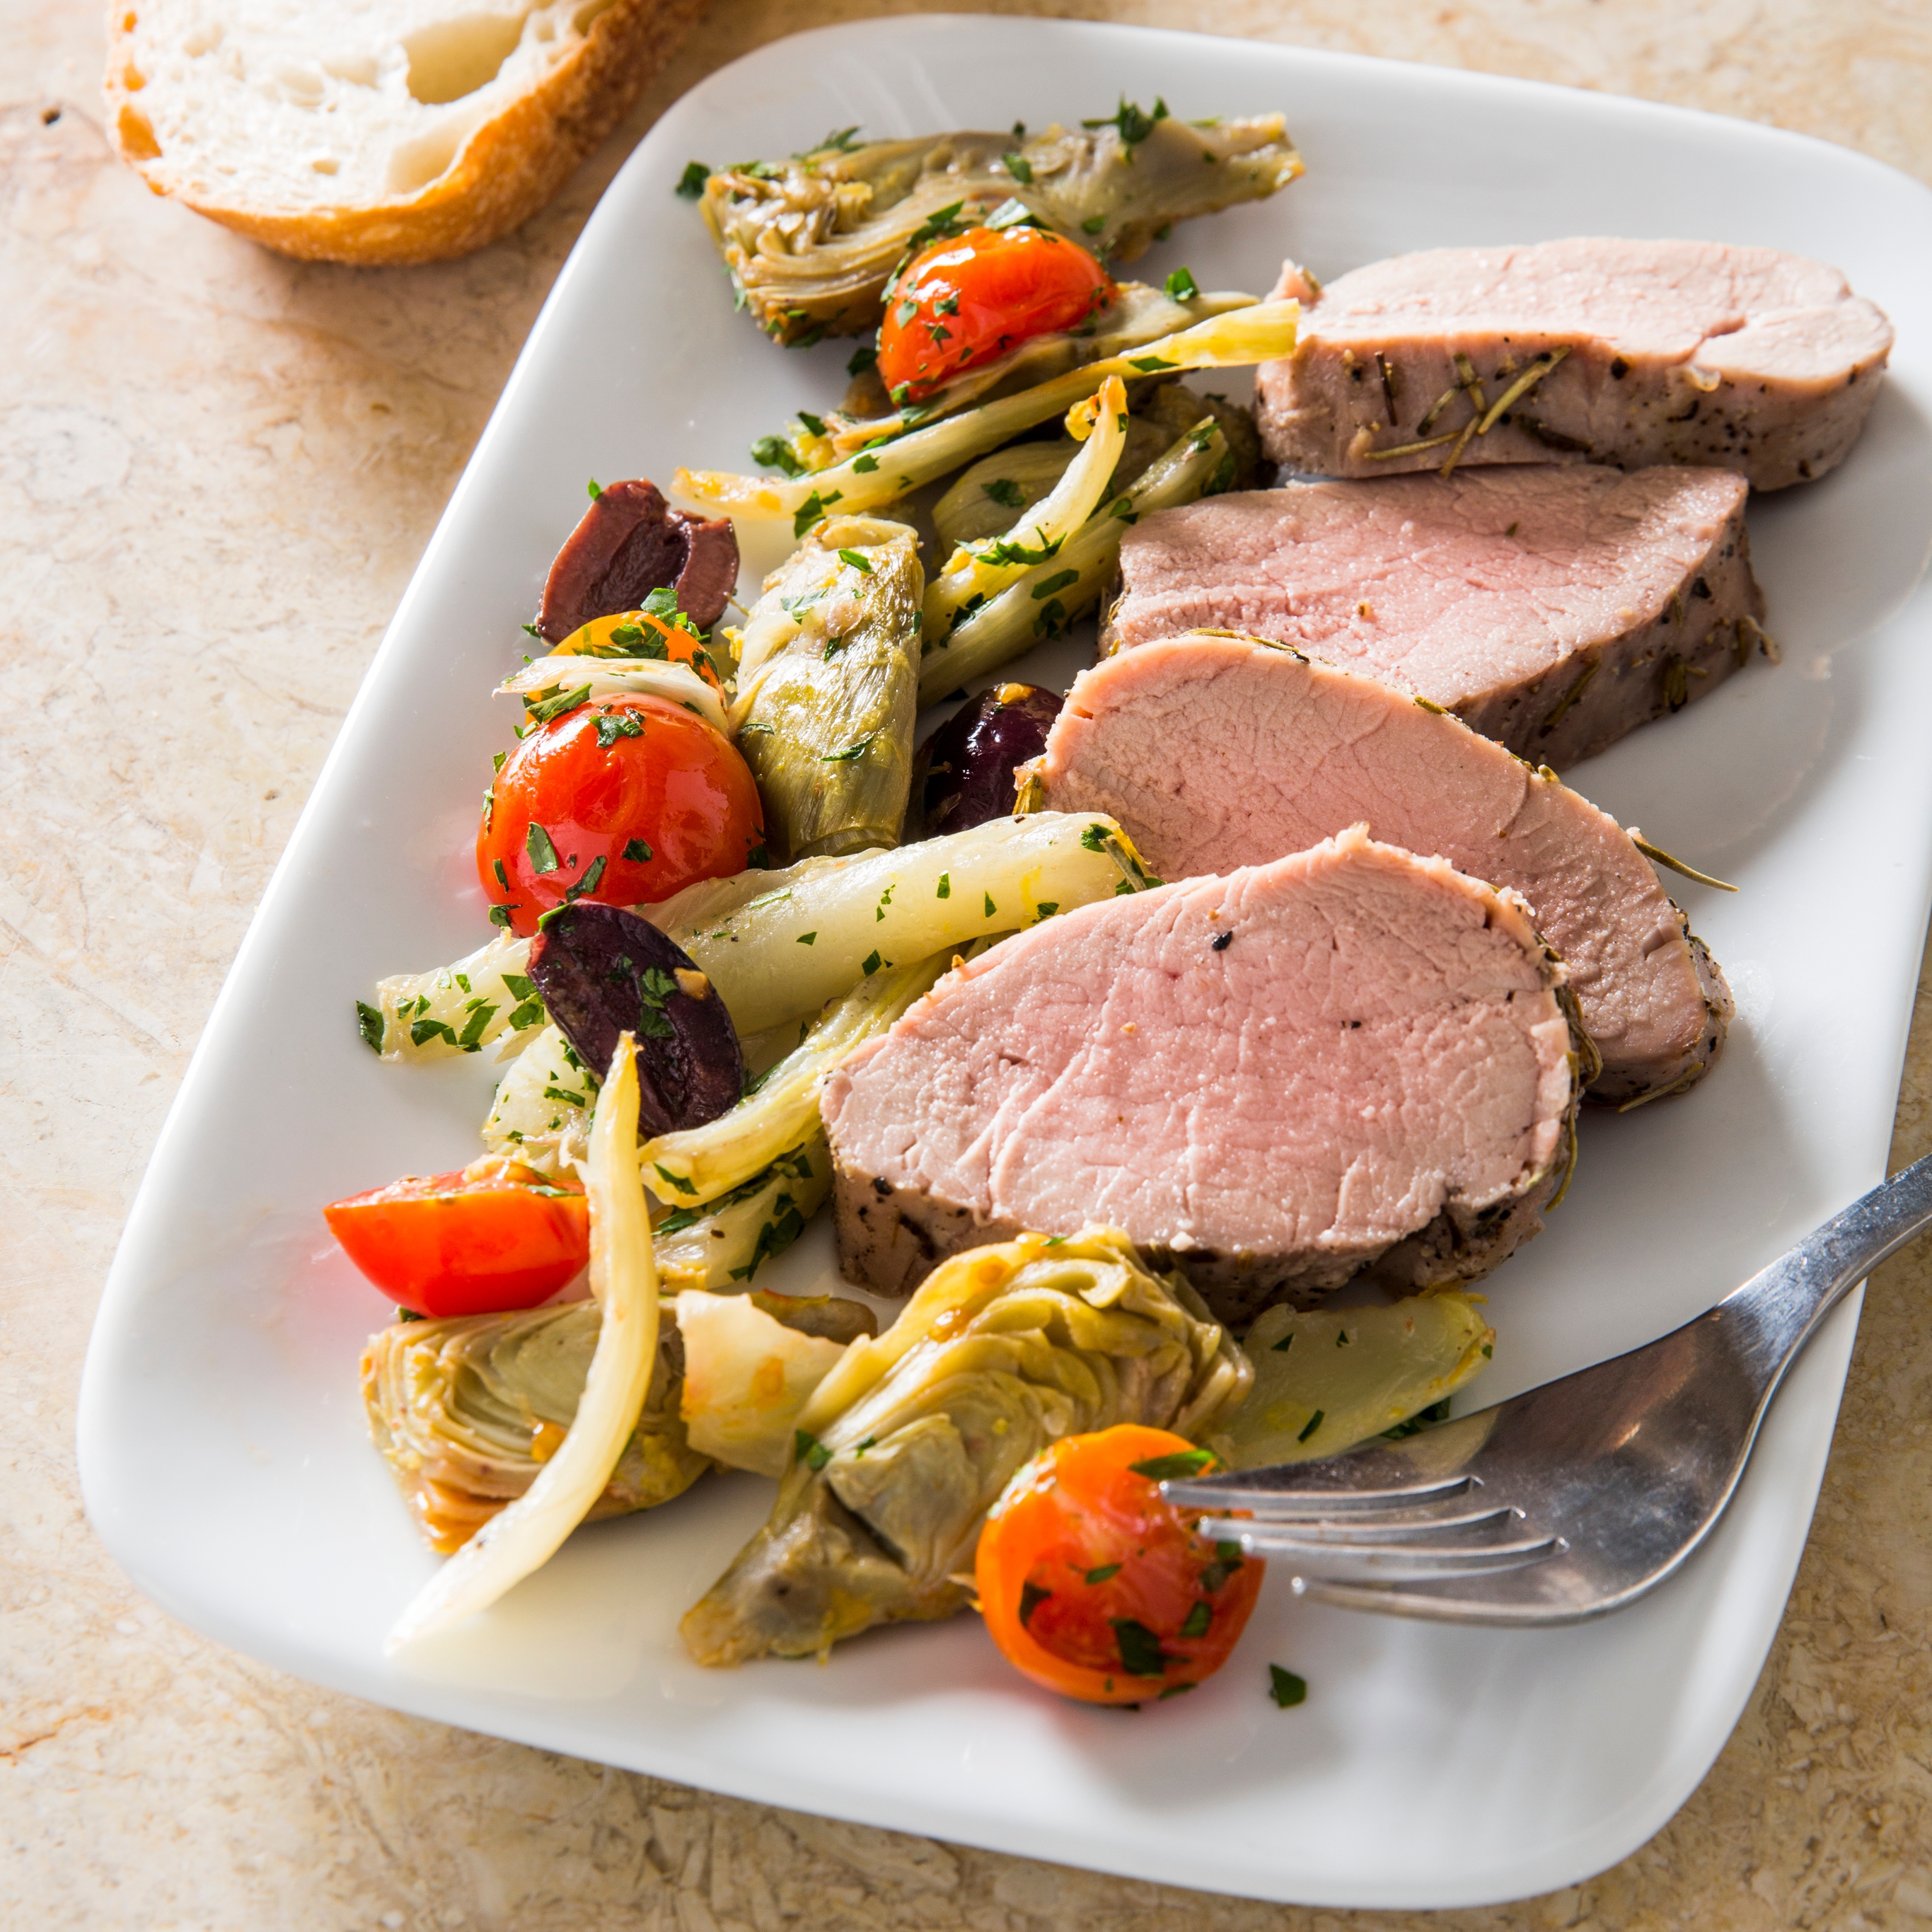 https://res.cloudinary.com/hksqkdlah/image/upload/SFS_Herbed_Pork_Tenderloin_with_Fennel_Tomatoes_Artichokes_and_Olives-12_1_h5ded0.jpg